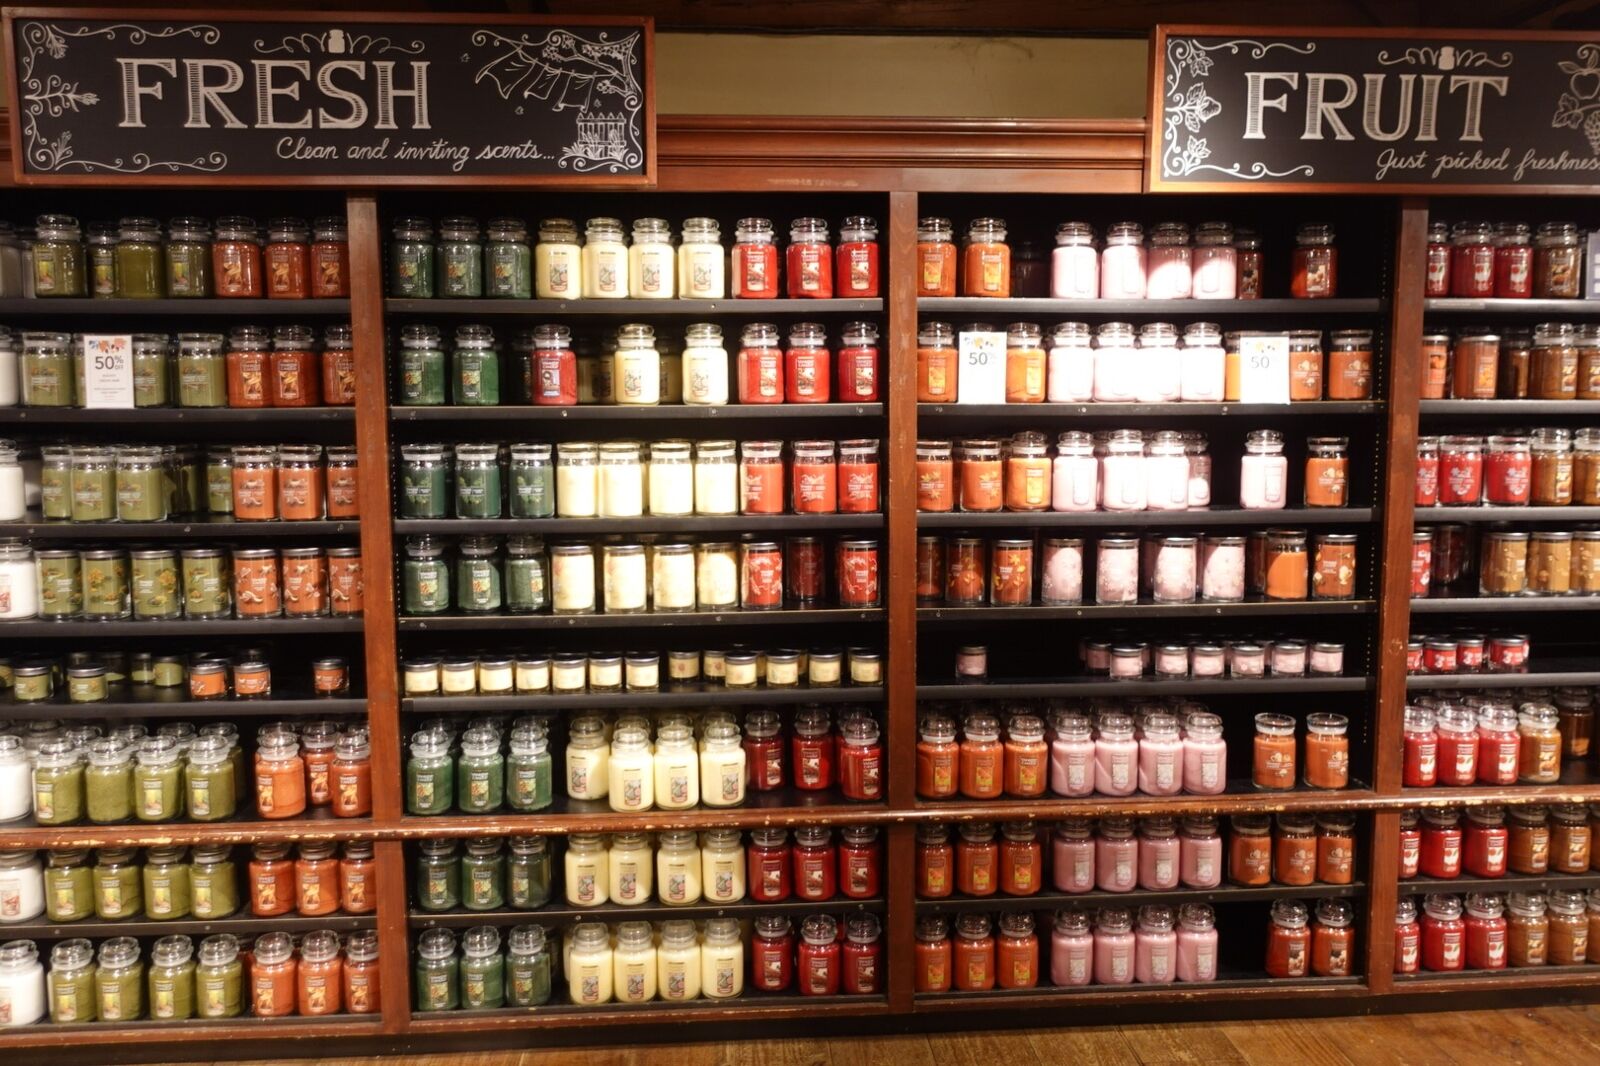  Yankee Candle Village in South Deerfield, a stop on a Massachusetts Road Trip